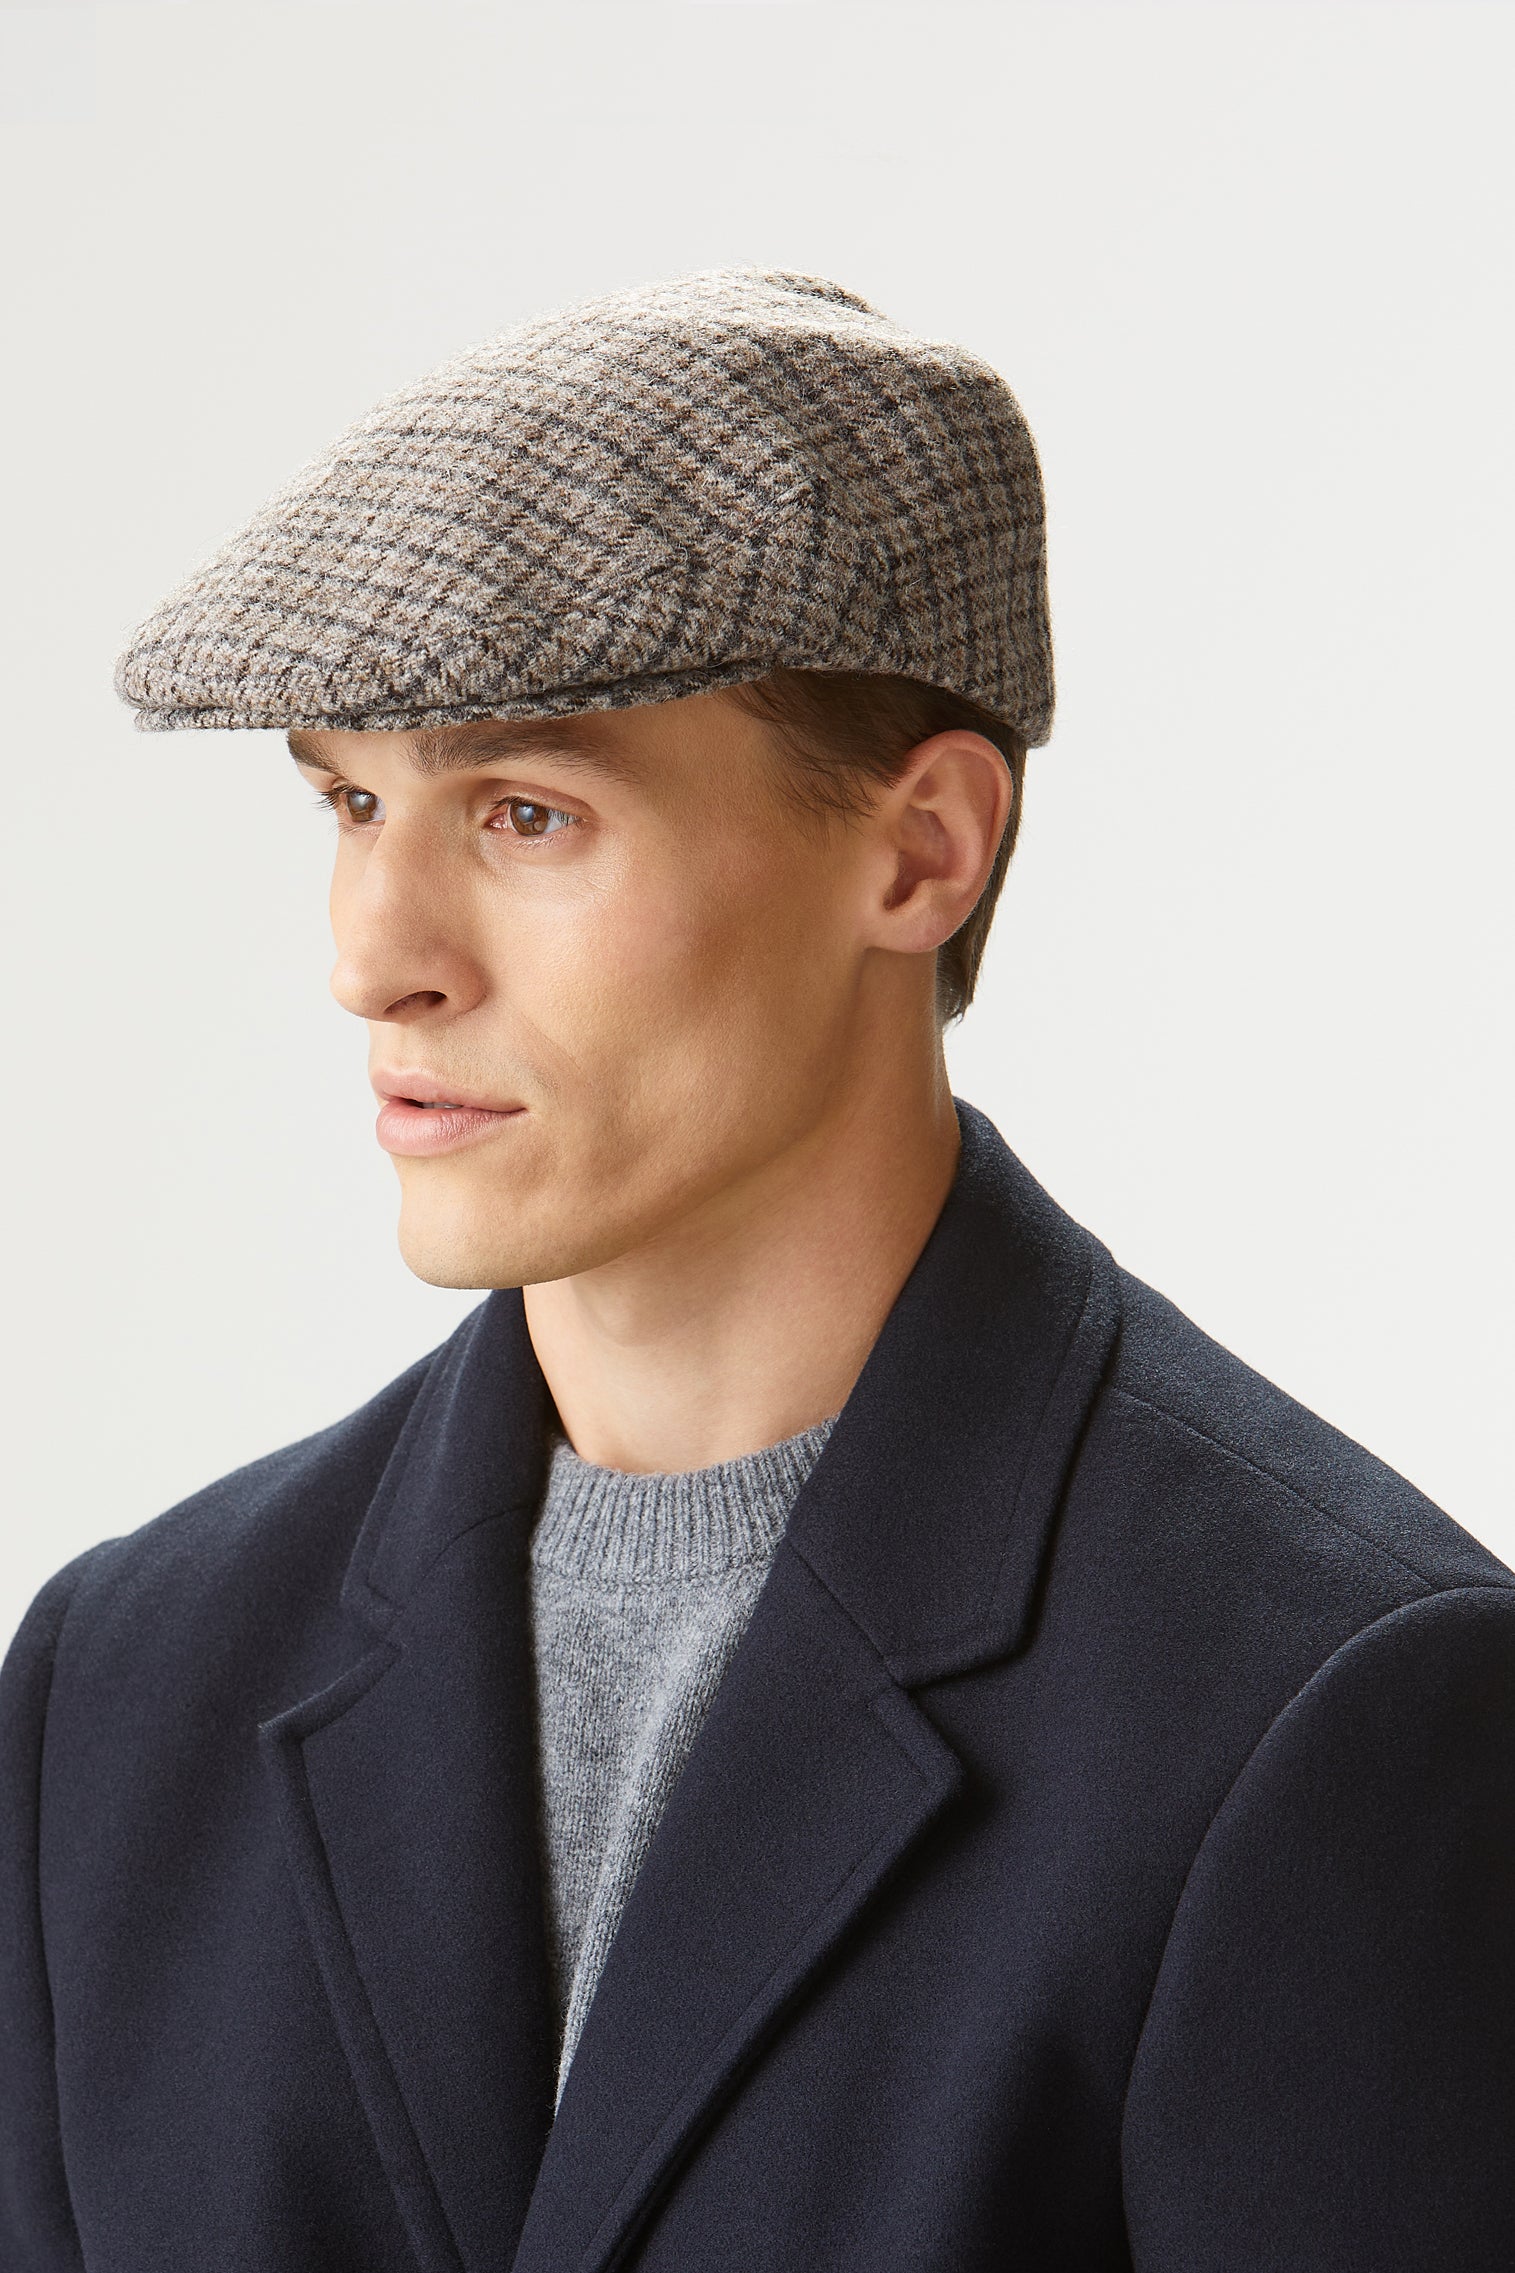 Gill Check Flat Cap - New Season Hat Collection - Lock & Co. Hatters London UK